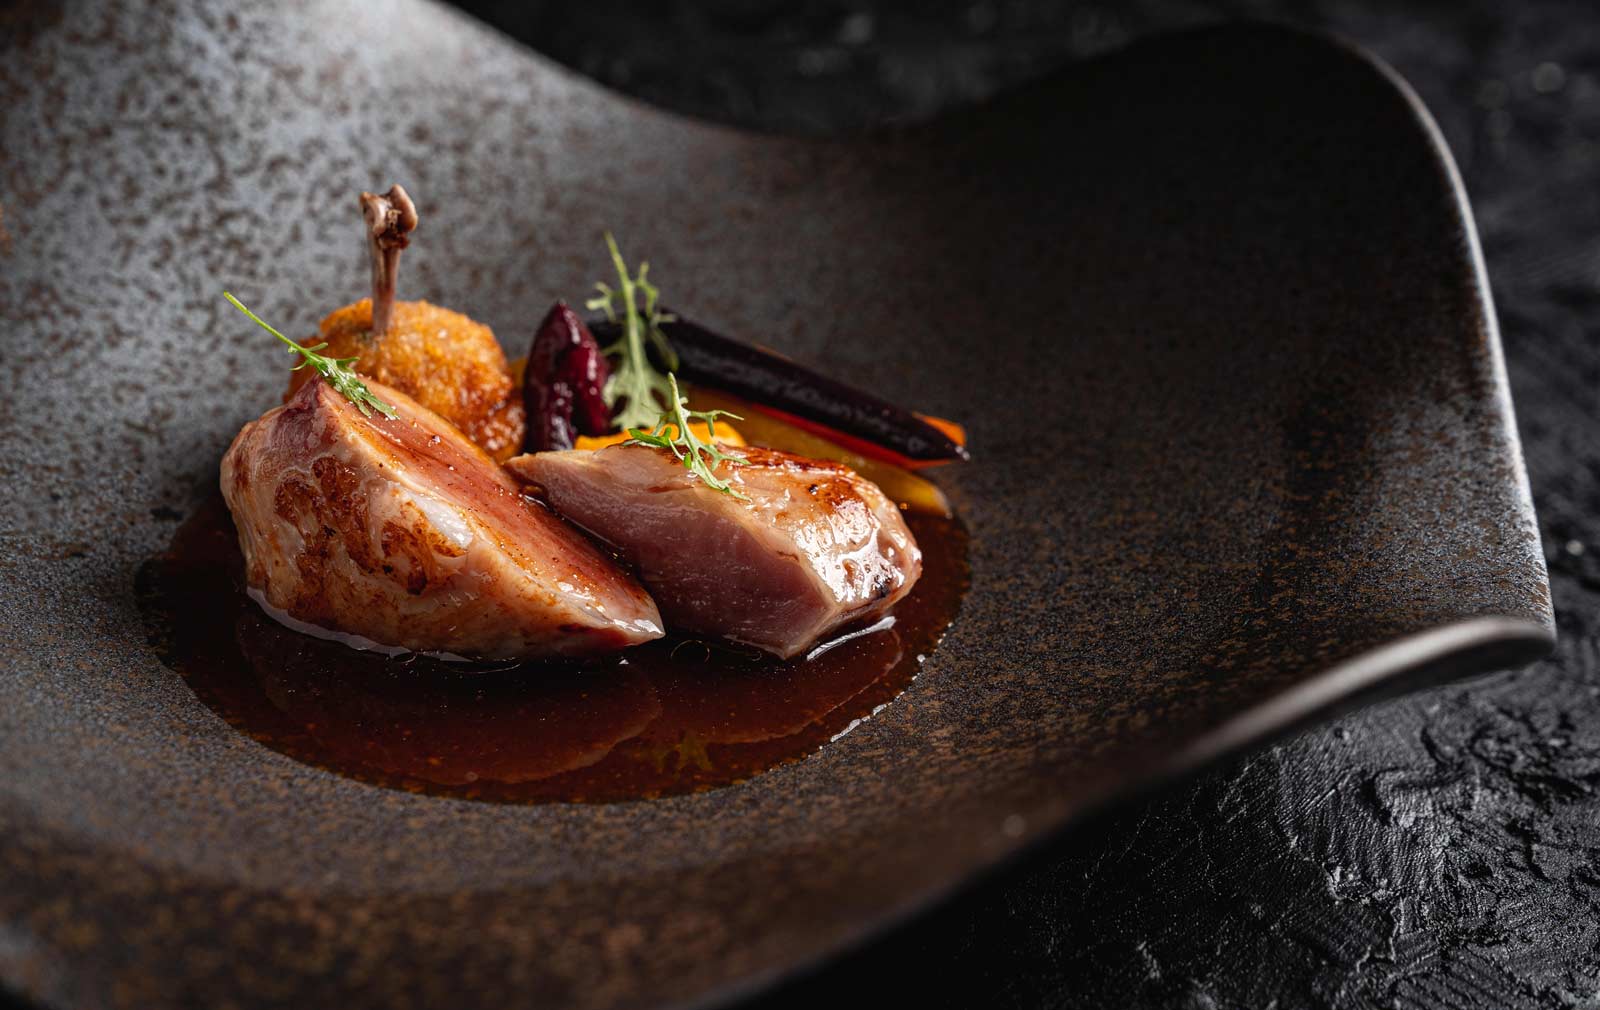 Tardes de Campo quail at Ando in Central, fusing Eastern and Western flavours